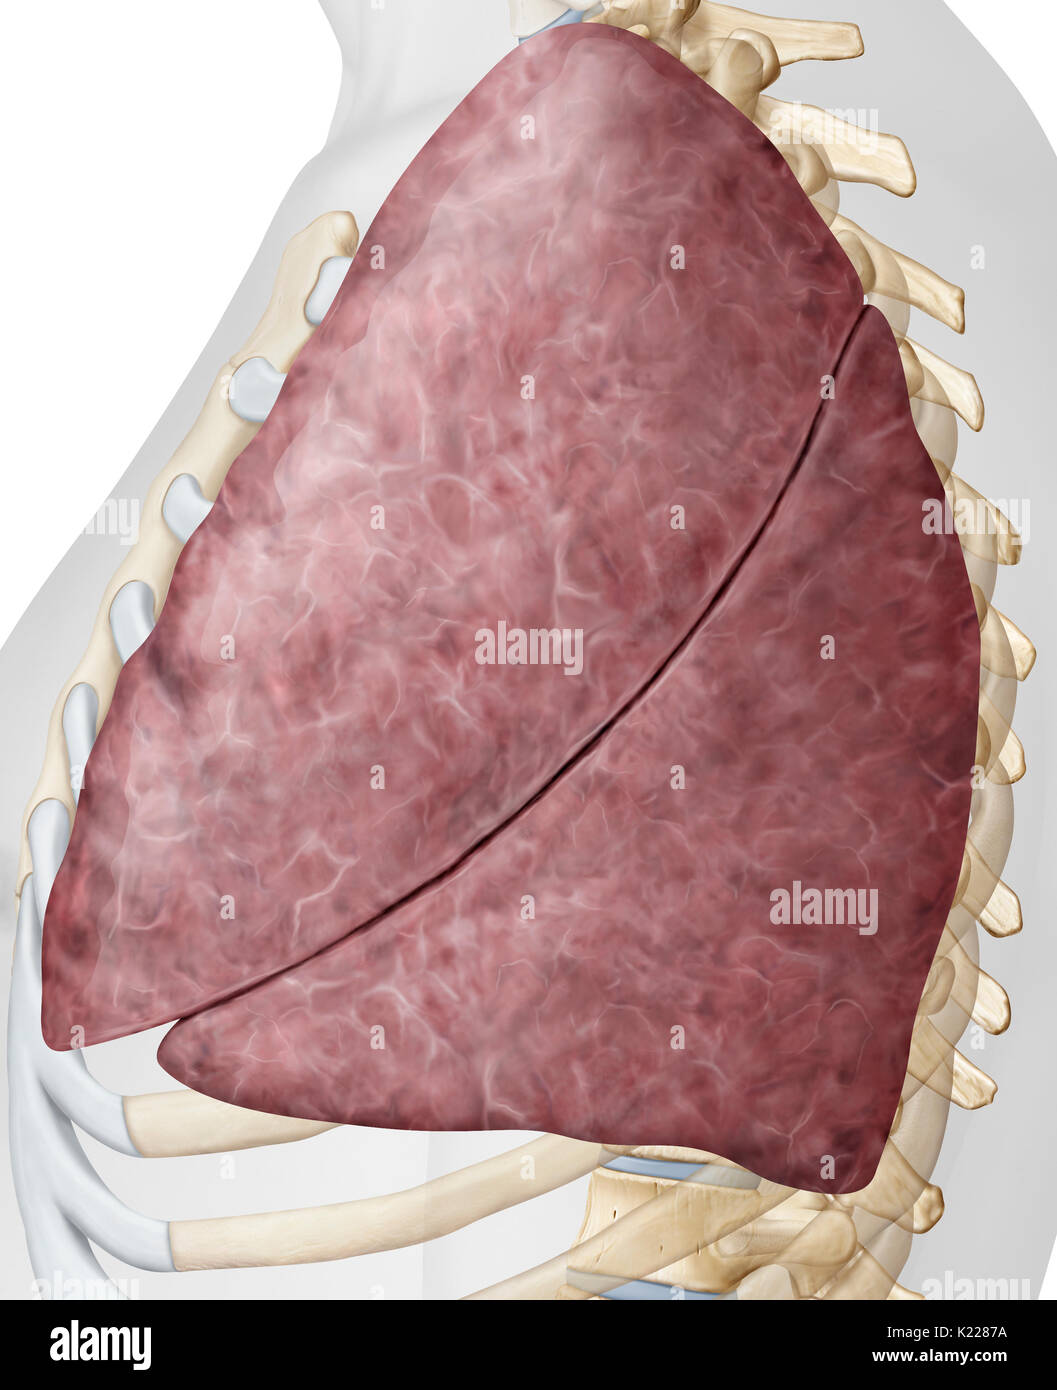 Respiratory organs formed of extensible tissue, in which air from the nasal and oral cavities is carried, ensuring oxygenation of the blood. Stock Photo